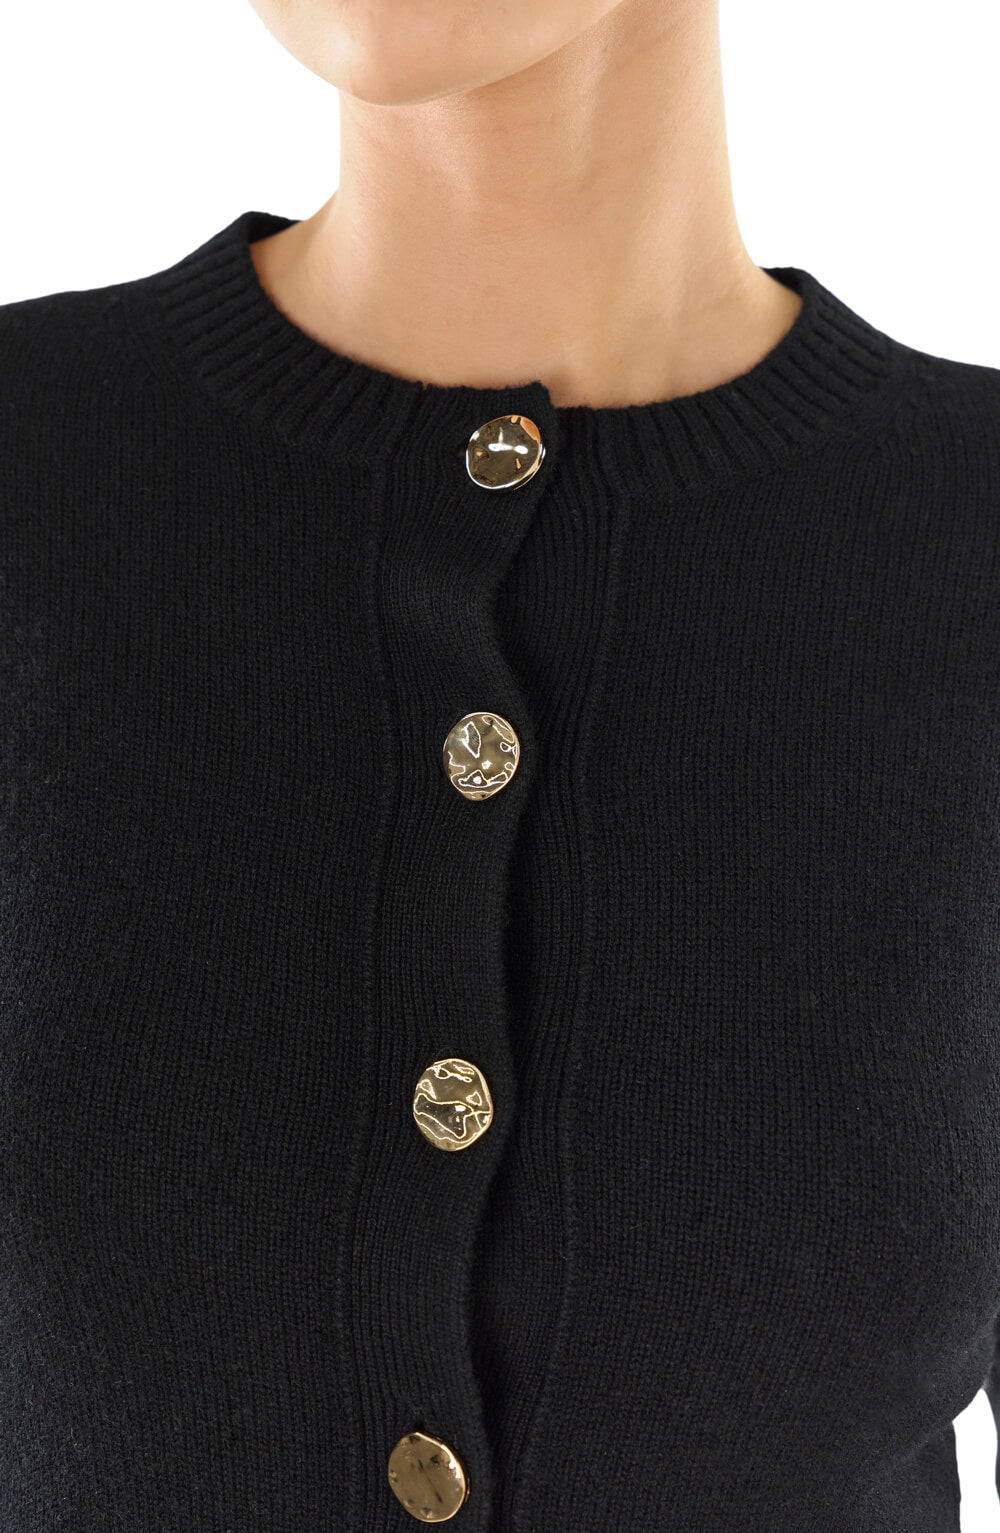 Monique Lhuillier black long sleeve cropped cardigan with gold buttons.